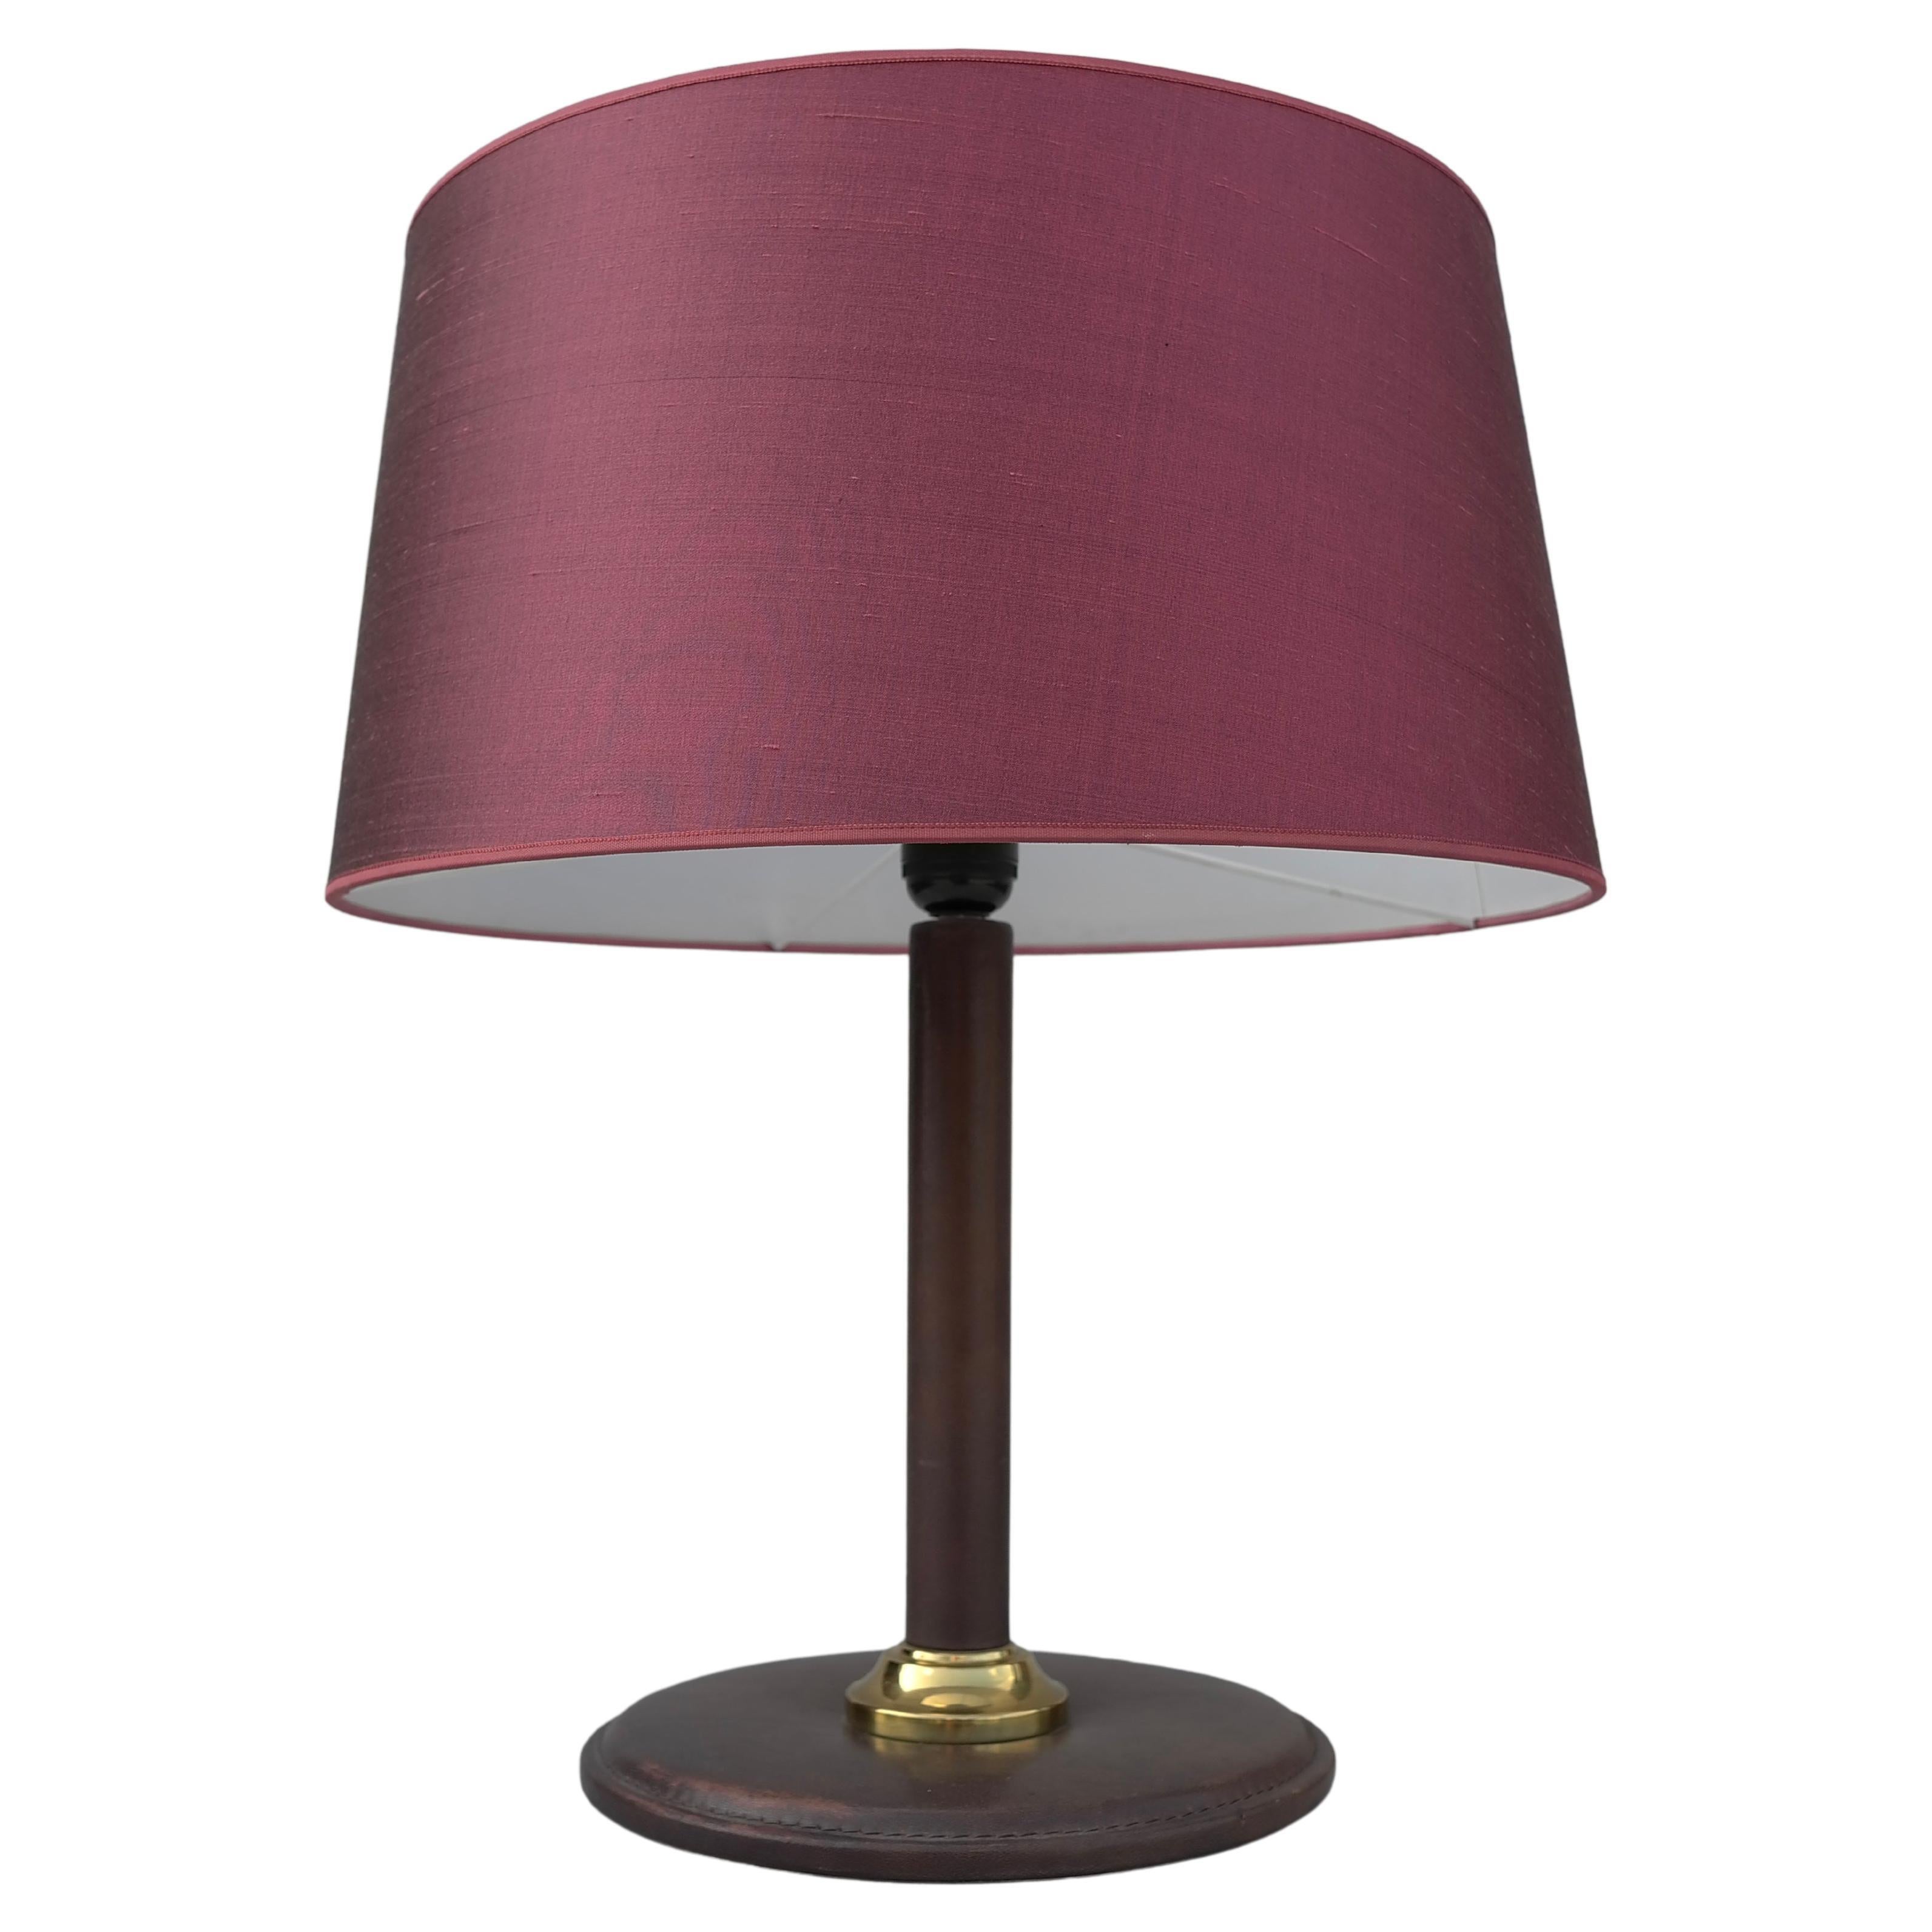 Hand-Stitched Brown Leather Table Lamp with Silk Deep Pink Shade, France, 1960s For Sale